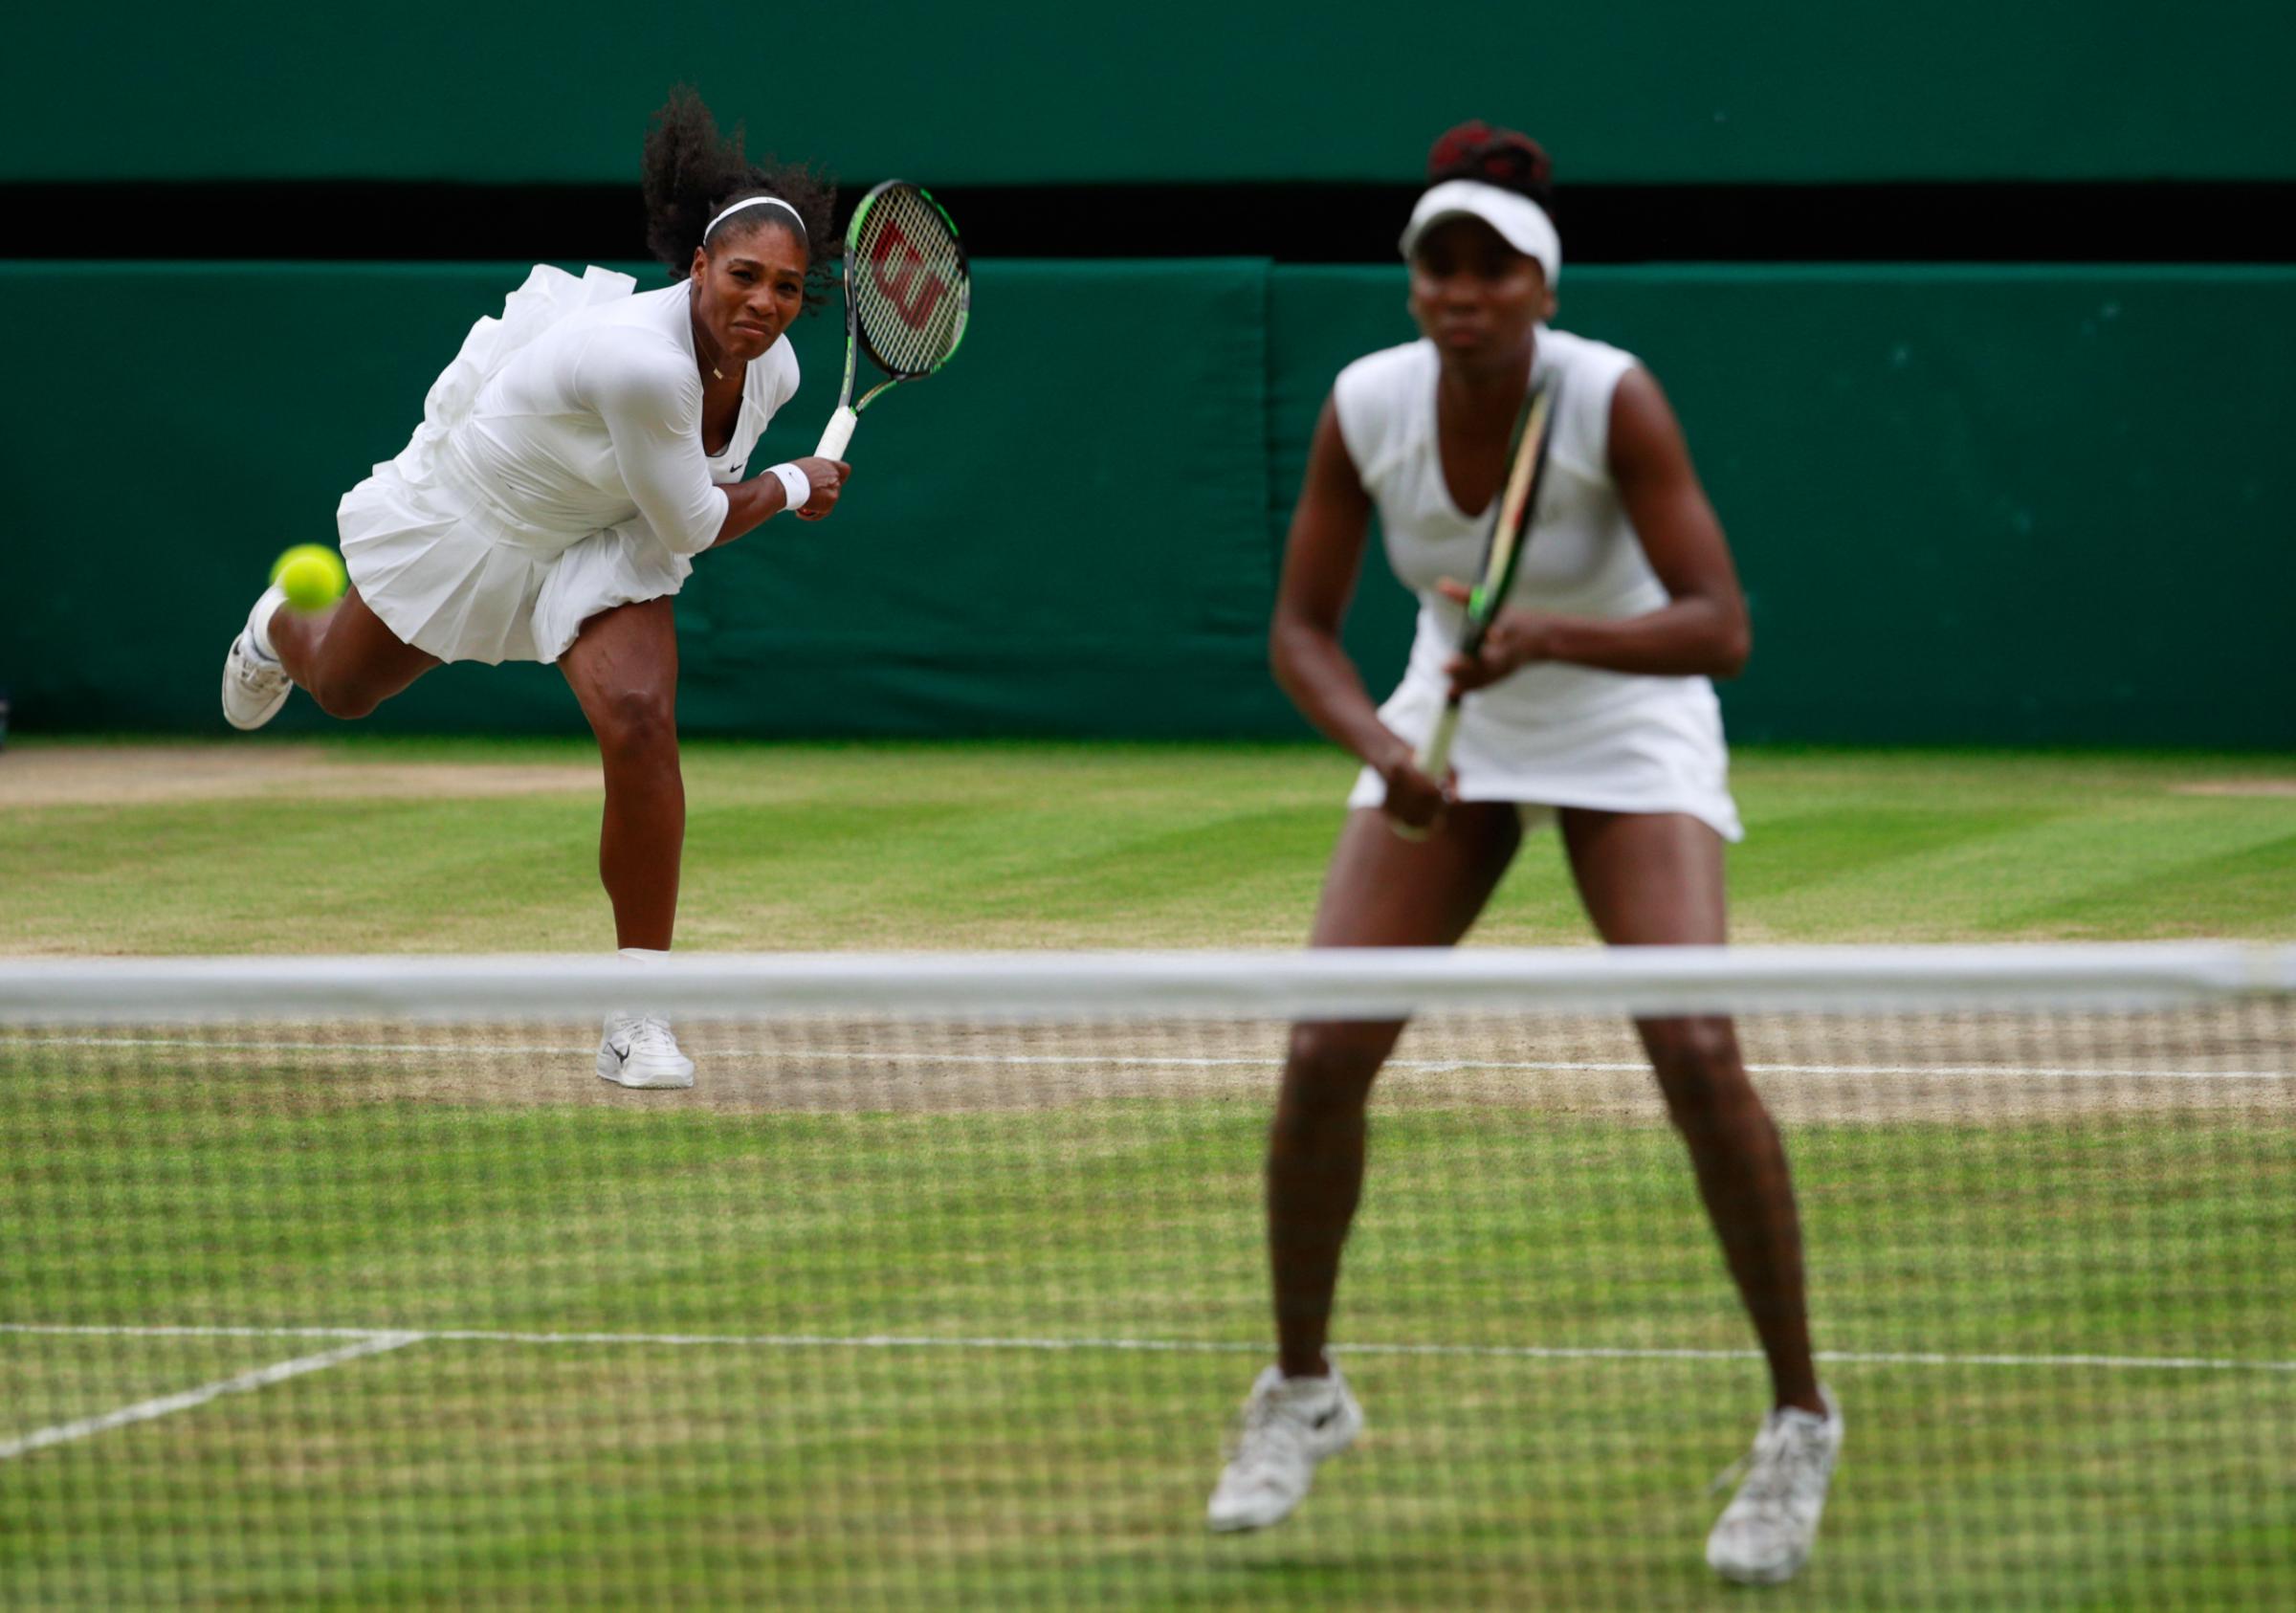 Serena Williams and Venus Williams—For many top pro athletes, an Olympic medal is a nice accessory to have hanging in the game room. The Grand Slams, majors and NBA titles are what pay the bills—a point made clear this summer when LeBron James, Stephen Curry, Rory McIlroy and many other big names bailed on Rio. They cited fatigue, injuries and the risk of catching Zika. But really, these athletes are staying home because they can afford to. The Williams sisters could have joined these stars and skipped Rio. Instead, Venus and Serena are bucking this Olympic indifference. They’ve embraced the Games with the zeal of athletes for whom the event is their Super Bowl. They’re both four-time gold medalists, each with one singles title and three doubles golds won together. Venus recently said she holds the Olympics in higher regard than the Slams. When some pros expressed frustration that the Olympics don’t count toward pro tour rankings, she scoffed. “Who needs ranking points if you’re playing for a gold medal?” Venus said. “Gotta get your life in perspective.” More than anything, the bond between Venus and Serena is what keeps them coming back to the Olympics. What’s better than trying to win a gold medal while playing with your sibling? And as Serena’s career has surpassed her older -sister’s—she tied Steffi Graf’s Open-era record of 22 Grand Slam tournament wins at Wimbledon and will attempt to break it at the U.S. Open in -September––-Venus has remained her biggest fan. “I think some siblings would feel different,” Serena says. “But if I win, she feels like she won. There’s literally no difference.” In Rio, they can own the podium together. Serena is favored to de-fend the 2012 singles gold she won in London, while the sisters are a good bet to edge Switzerland’s Martina Hingis and Belinda Bencic for their fourth Olympic doubles title. And for what may be the last time, we’ll see America’s greatest sister act draped in gold. —S.G.